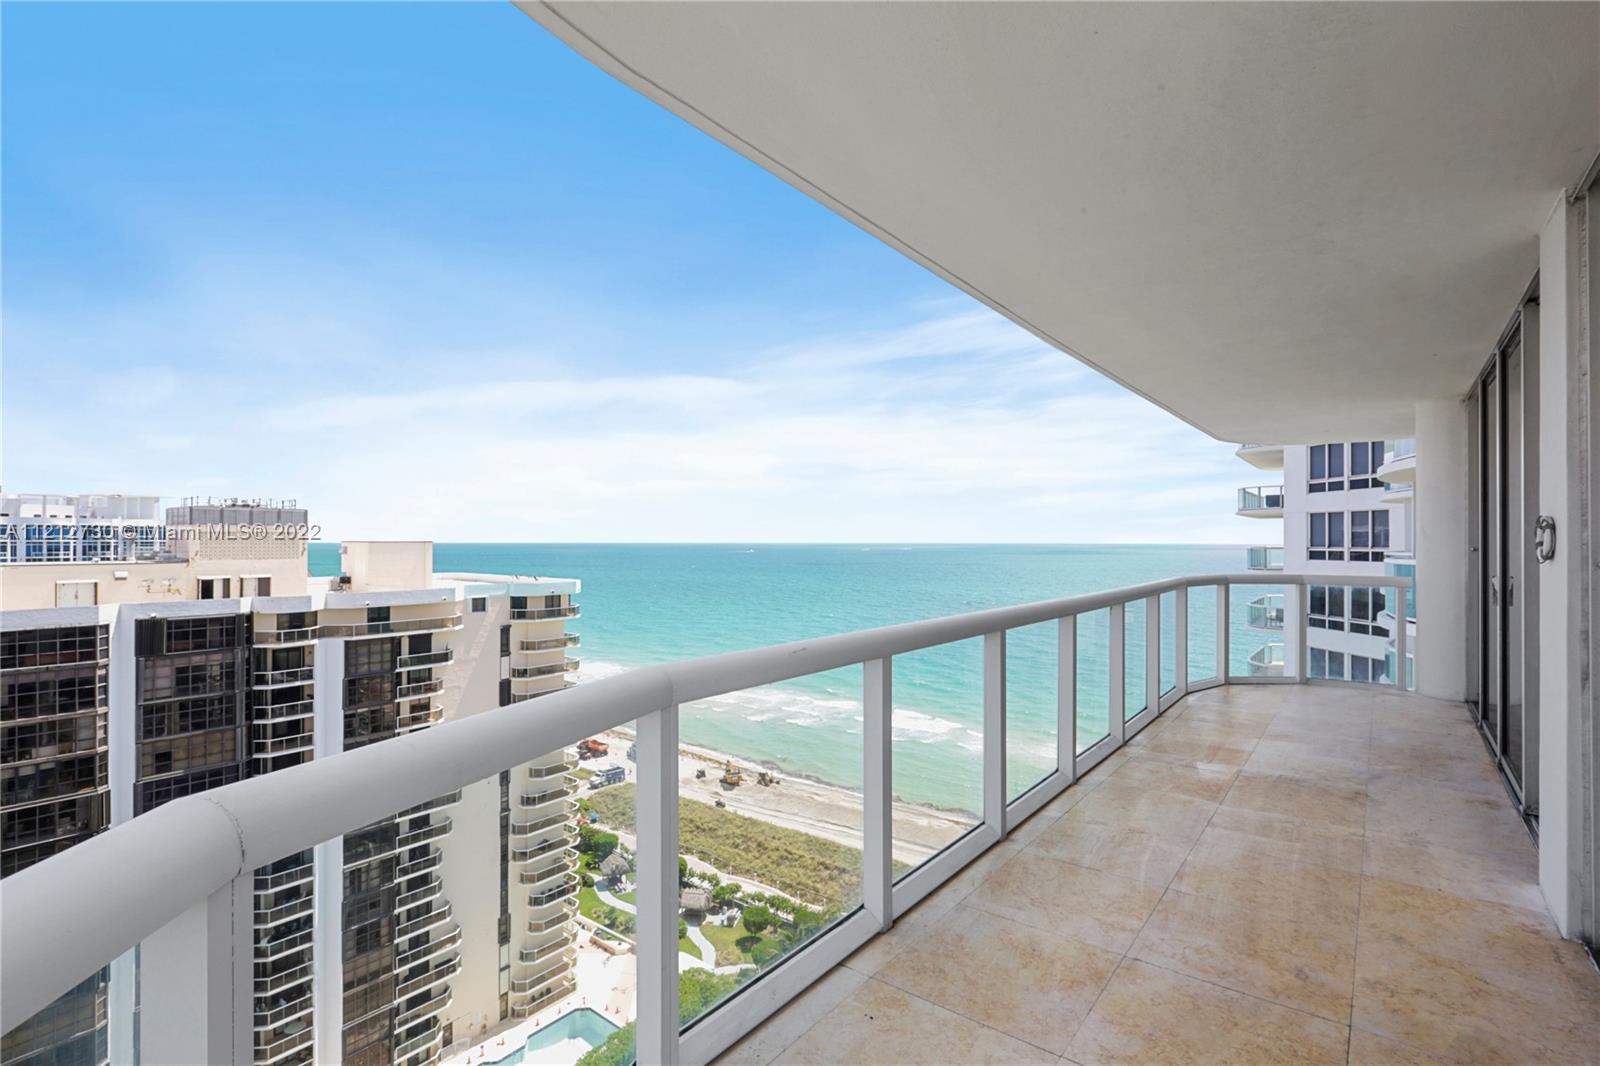 Miami living at its finest at Akoya Condominiums! This beautiful 20th floor corner unit is a 2/2 located on the beach with a WRAPAROUND balcony that captures the stunning sights of MIA. The condo has dramatic views of The Ocean, Biscayne Bay, Intercoastal & the Miami Skyline.  Located in North Beach (NoBe), Minutes from many of Miami's best attractions and nightlife. Akoya offers many amenities for its residents including 24 hour security, valet service, secure parking garage, concierge service, gym, direct beach access with service, heated swimming pool (currently being renovated), tennis courts, a putting green, and much more.  Dog friendly up to 50 lbs - Can be rented 12 times per yr - Built in 2004, the 47 story Akoya is the third tallest building in Miami Beach.  A must see!